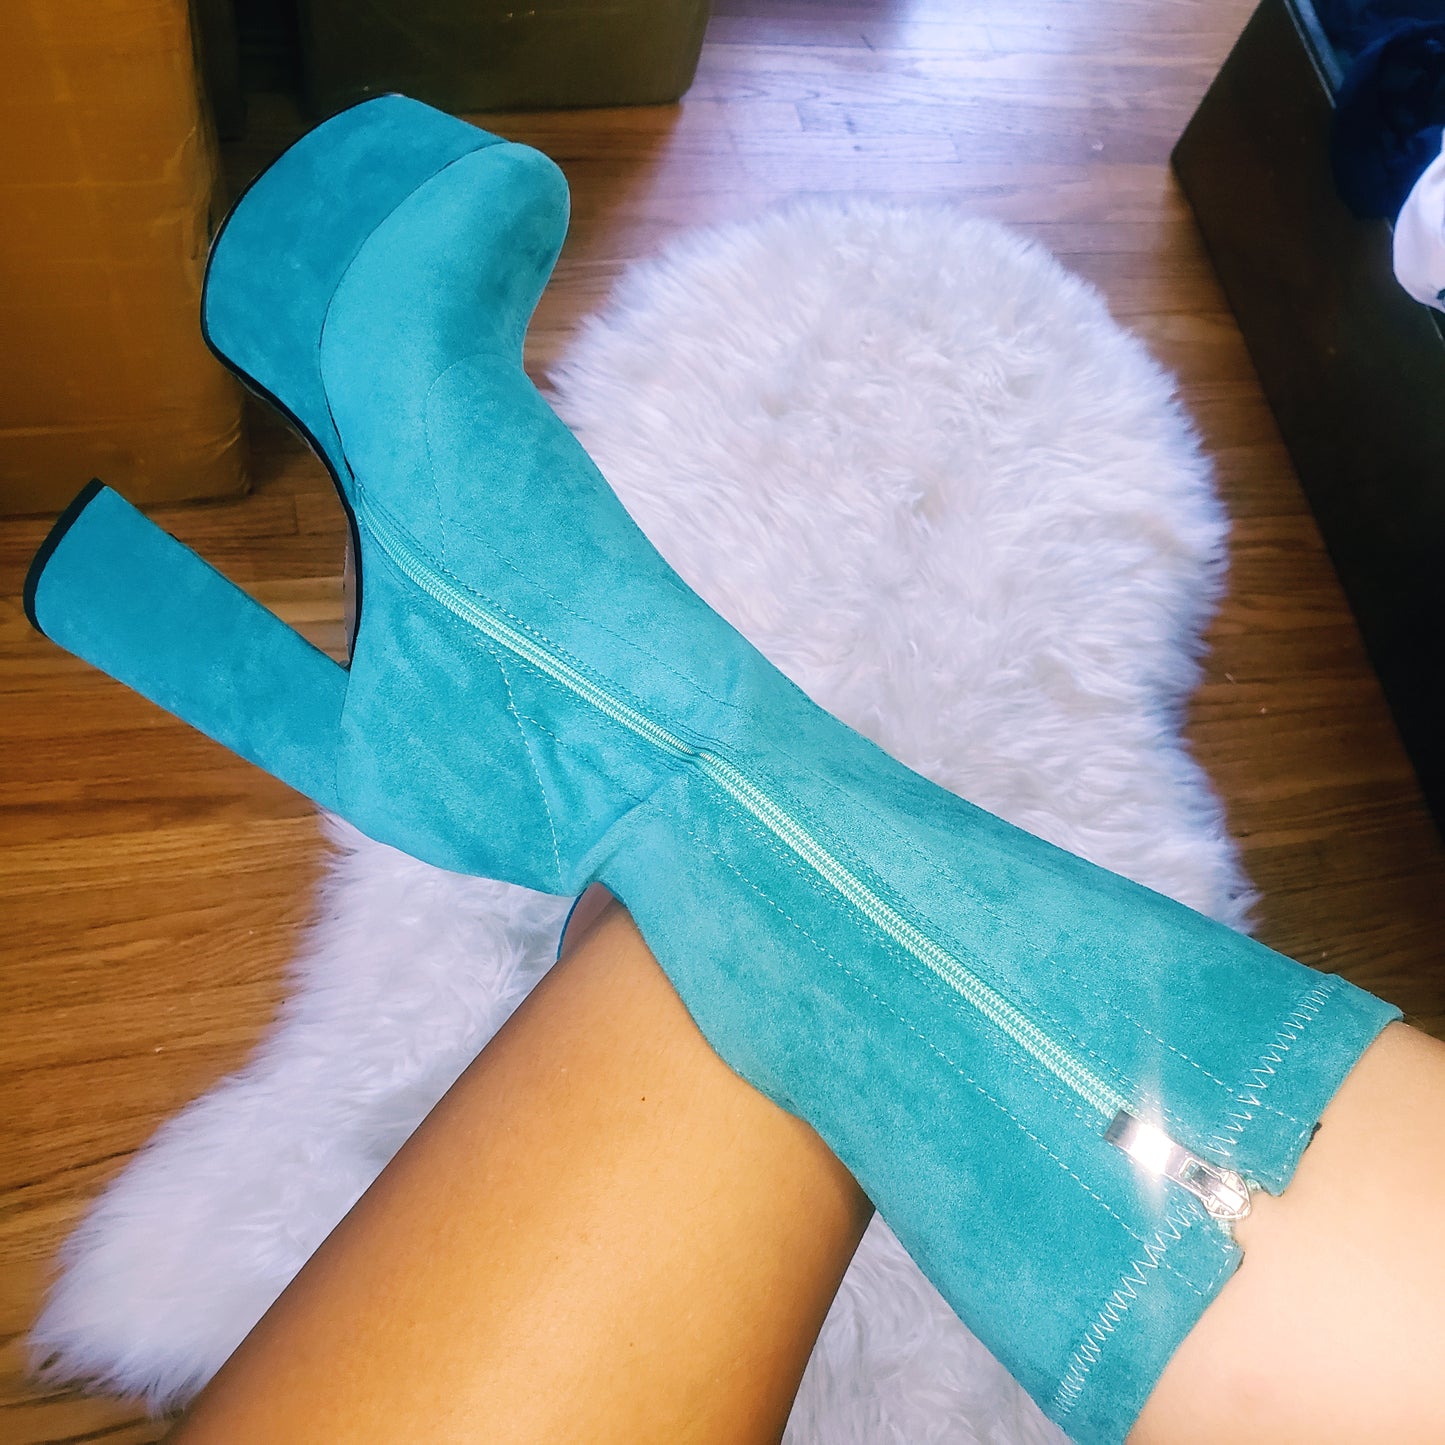 Teal blue suede retro chunky platform boots. Round toe and block heel give it a 60's and 70's inspired twist. Knee high suede boots. 